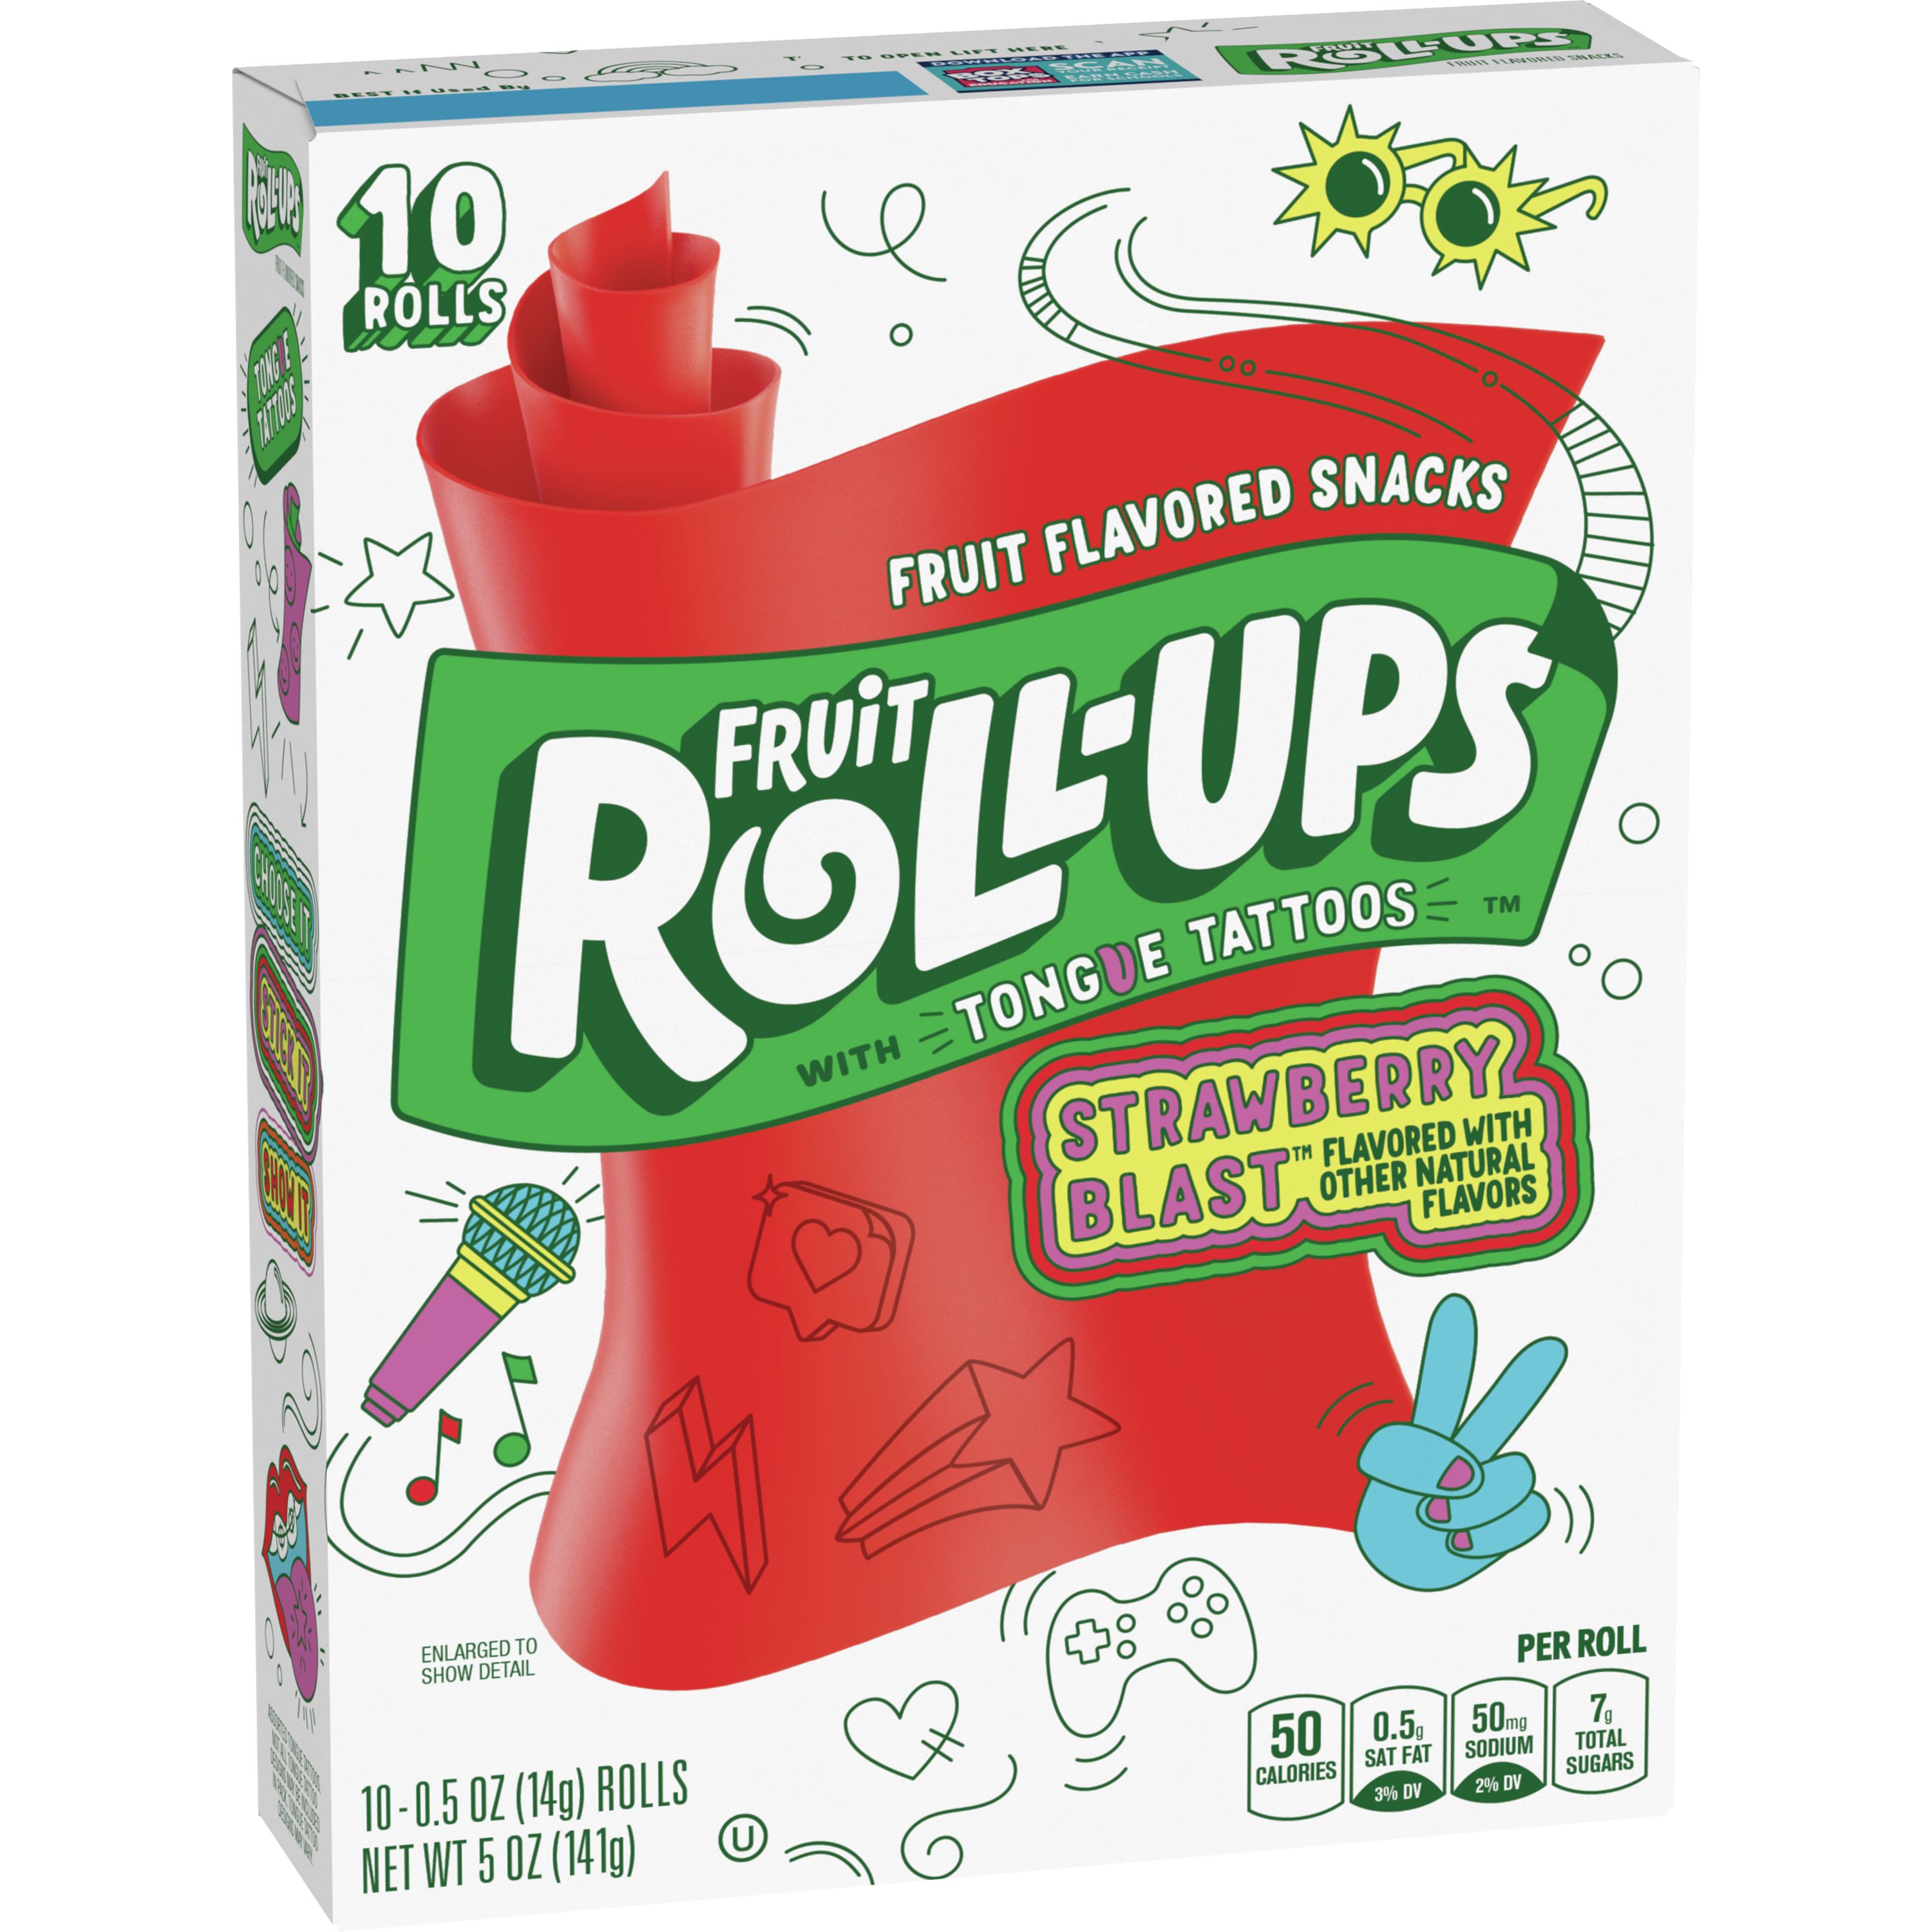 dog with glasses  BLM on Twitter fruitrollups I just purchased a box of  unicorn tattoo fruit roll ups and was super excited but my first roll up  didnt have any tattoos 